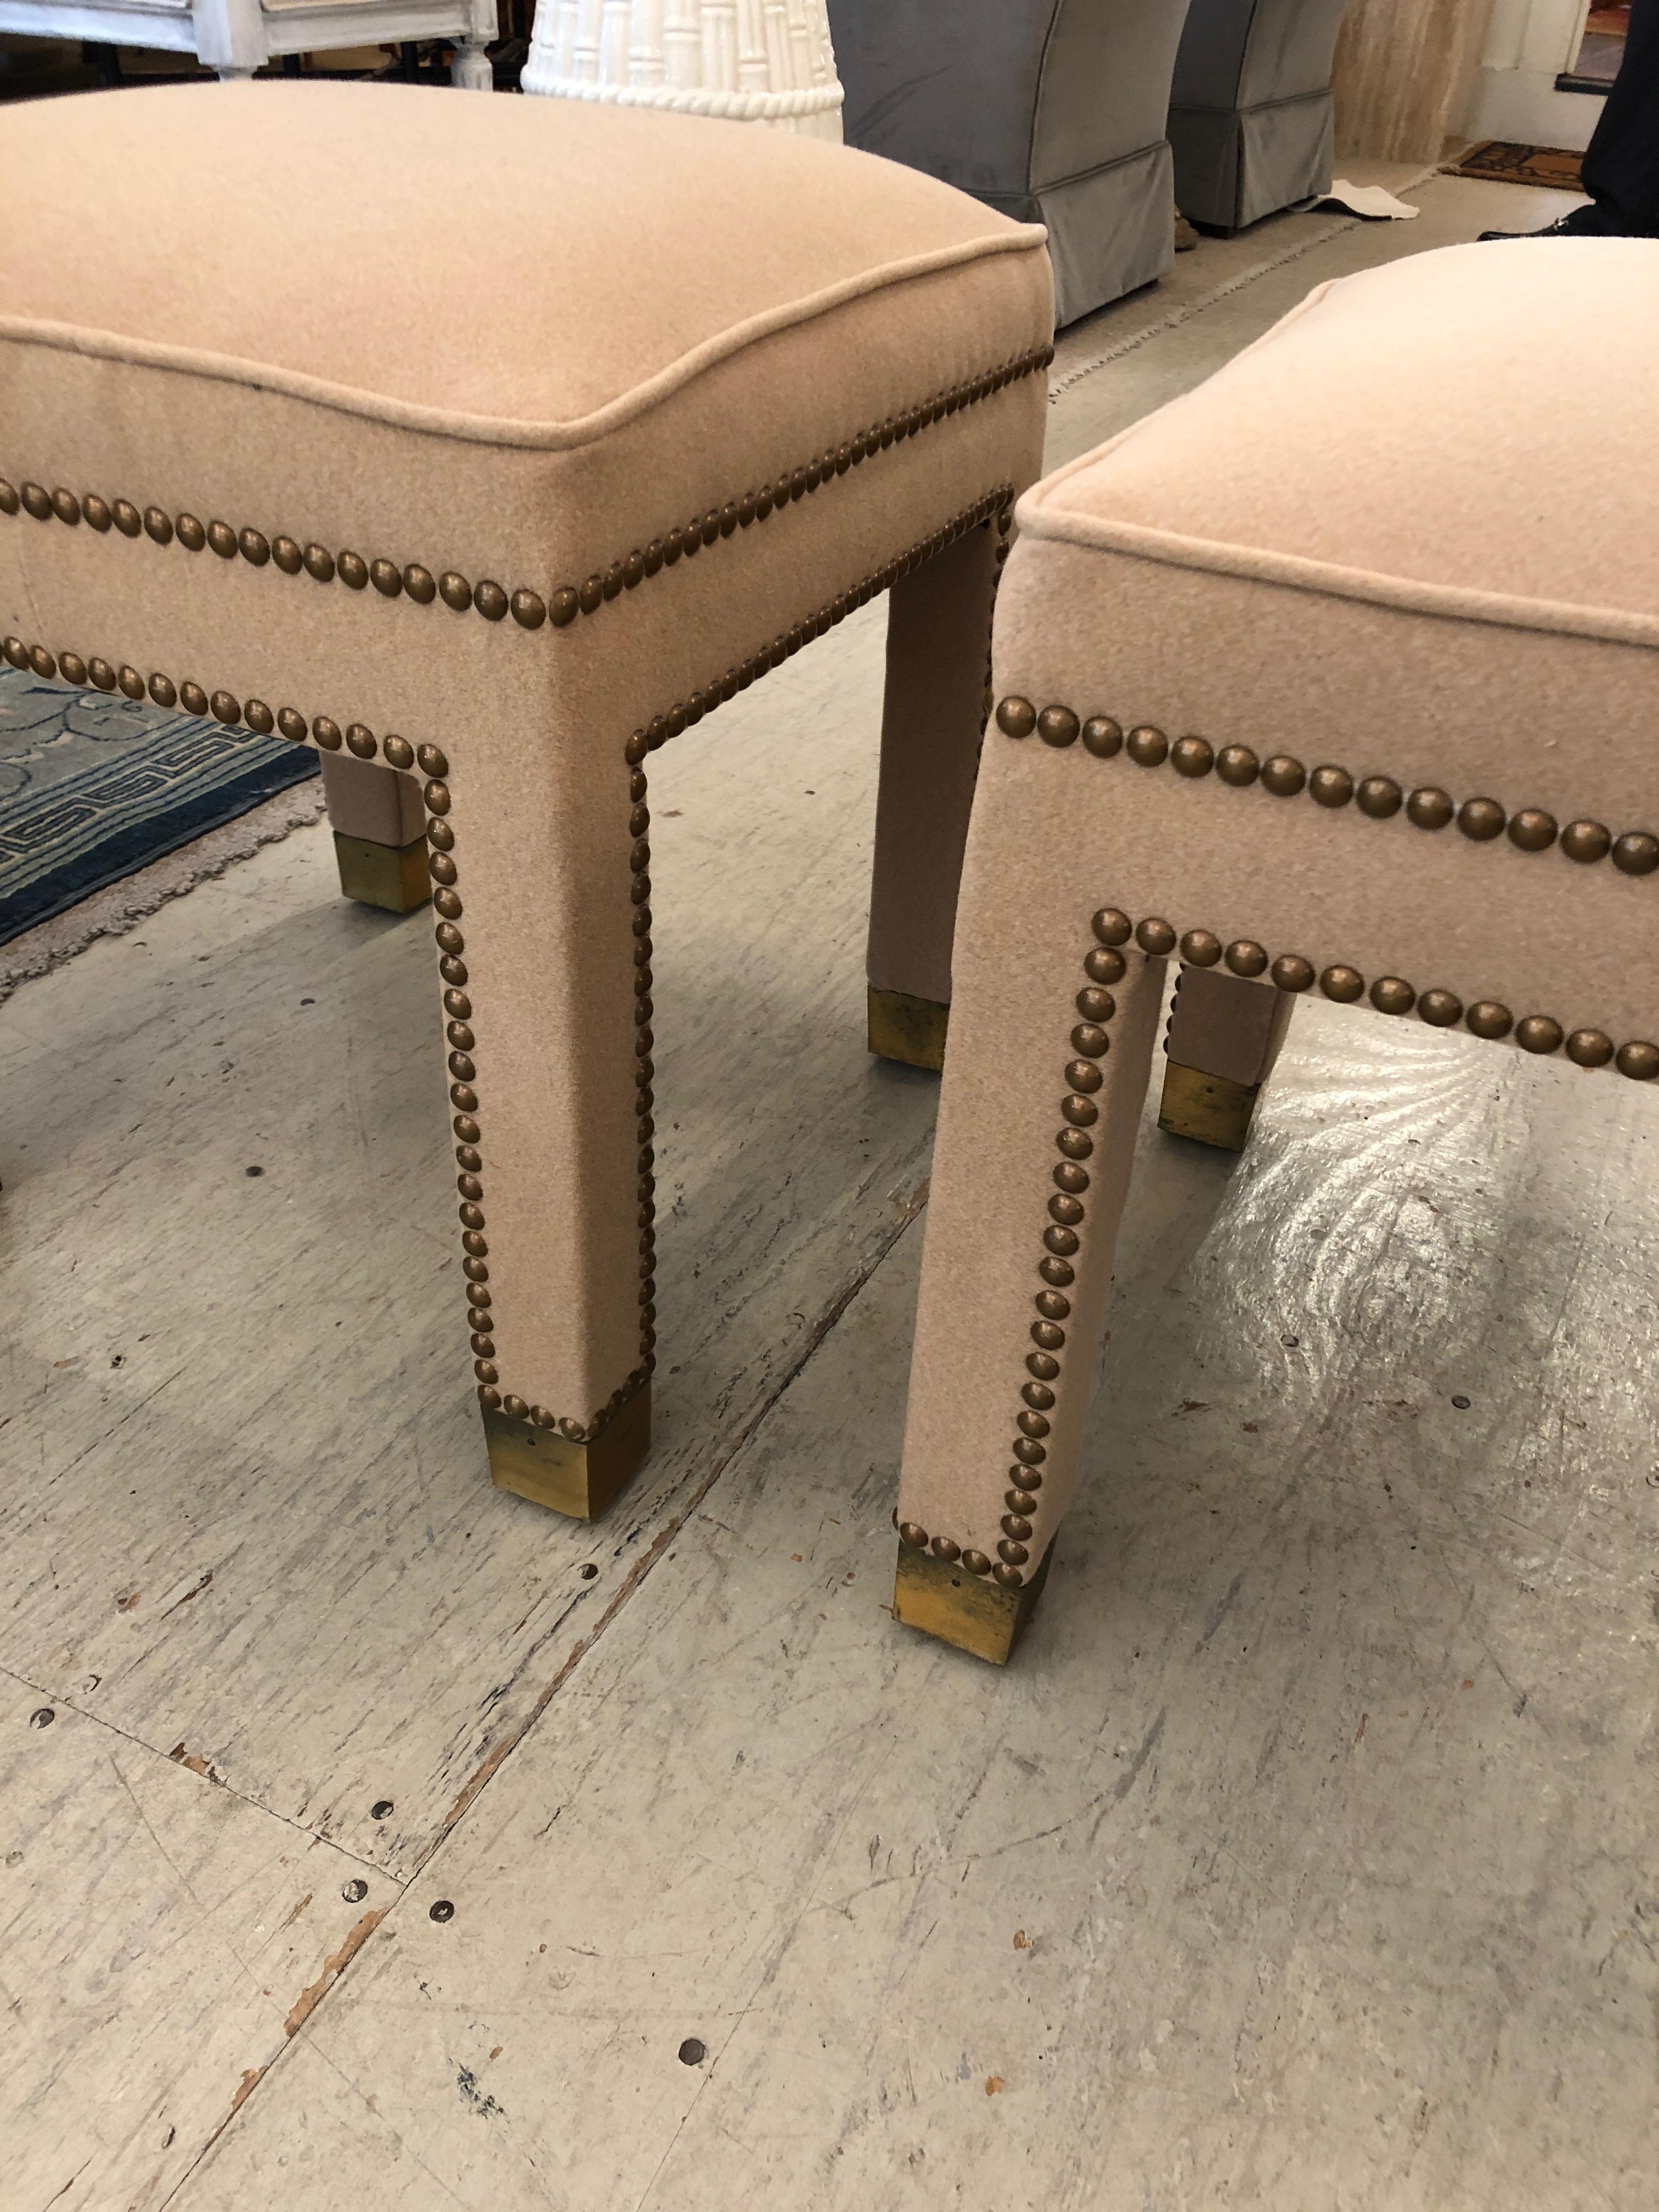 Two vintage Mid-Century Modern ottomans completely redone in sumptuous camelhair with brass nailheads and stunning original brass caps on the feet. Could be used as a coffee table in front of a sofa.